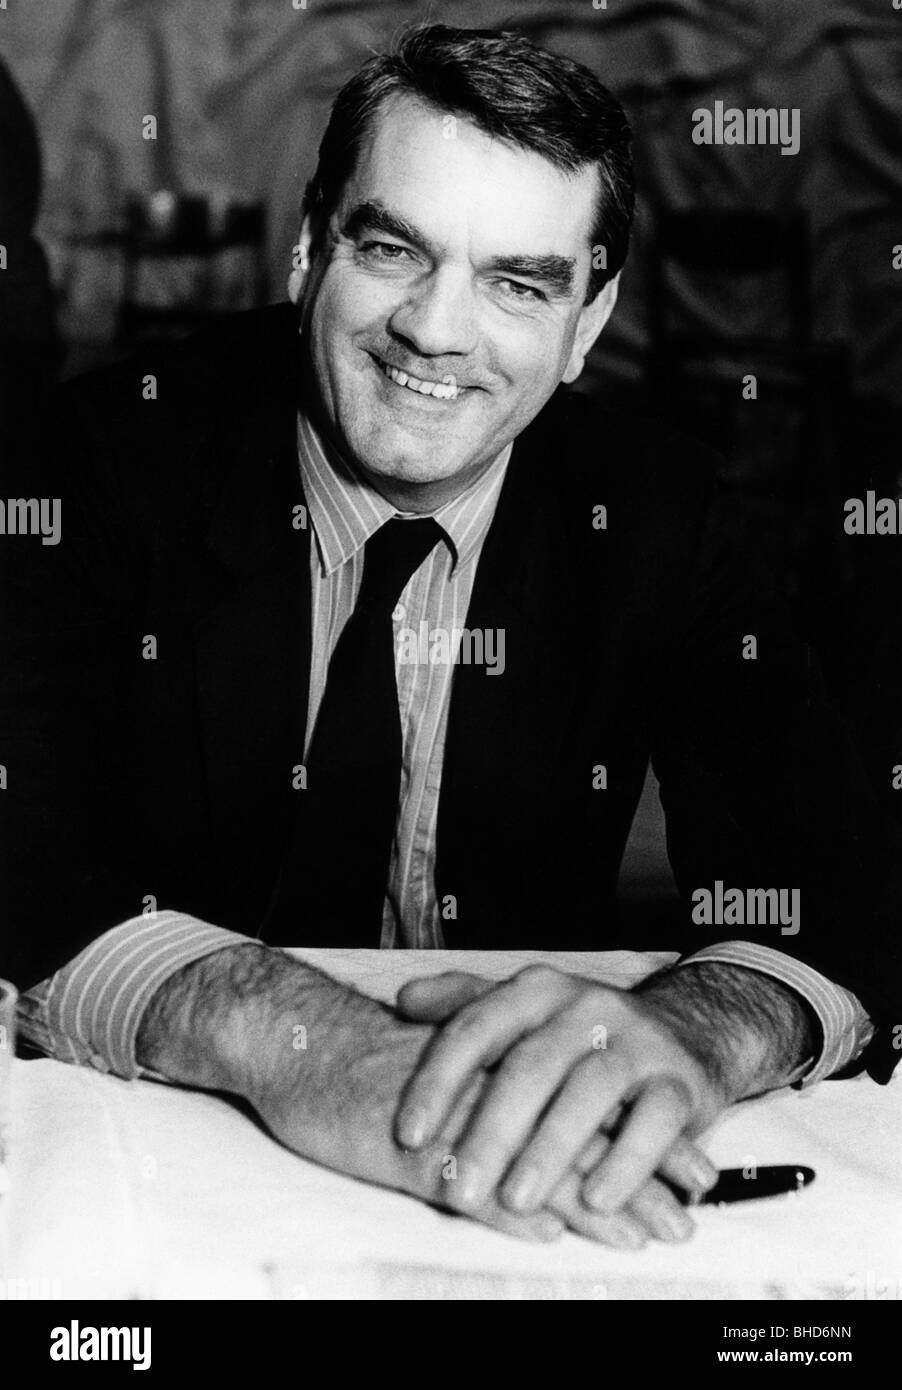 Irving, David John Cawdell, * 24.3.1938, English historian, author / writer, half length, guest speaker at a meeting of the German right wing extremist party 'Deutsche Volksunion' (German People's Union), Munich, 19.1.1986, Stock Photo